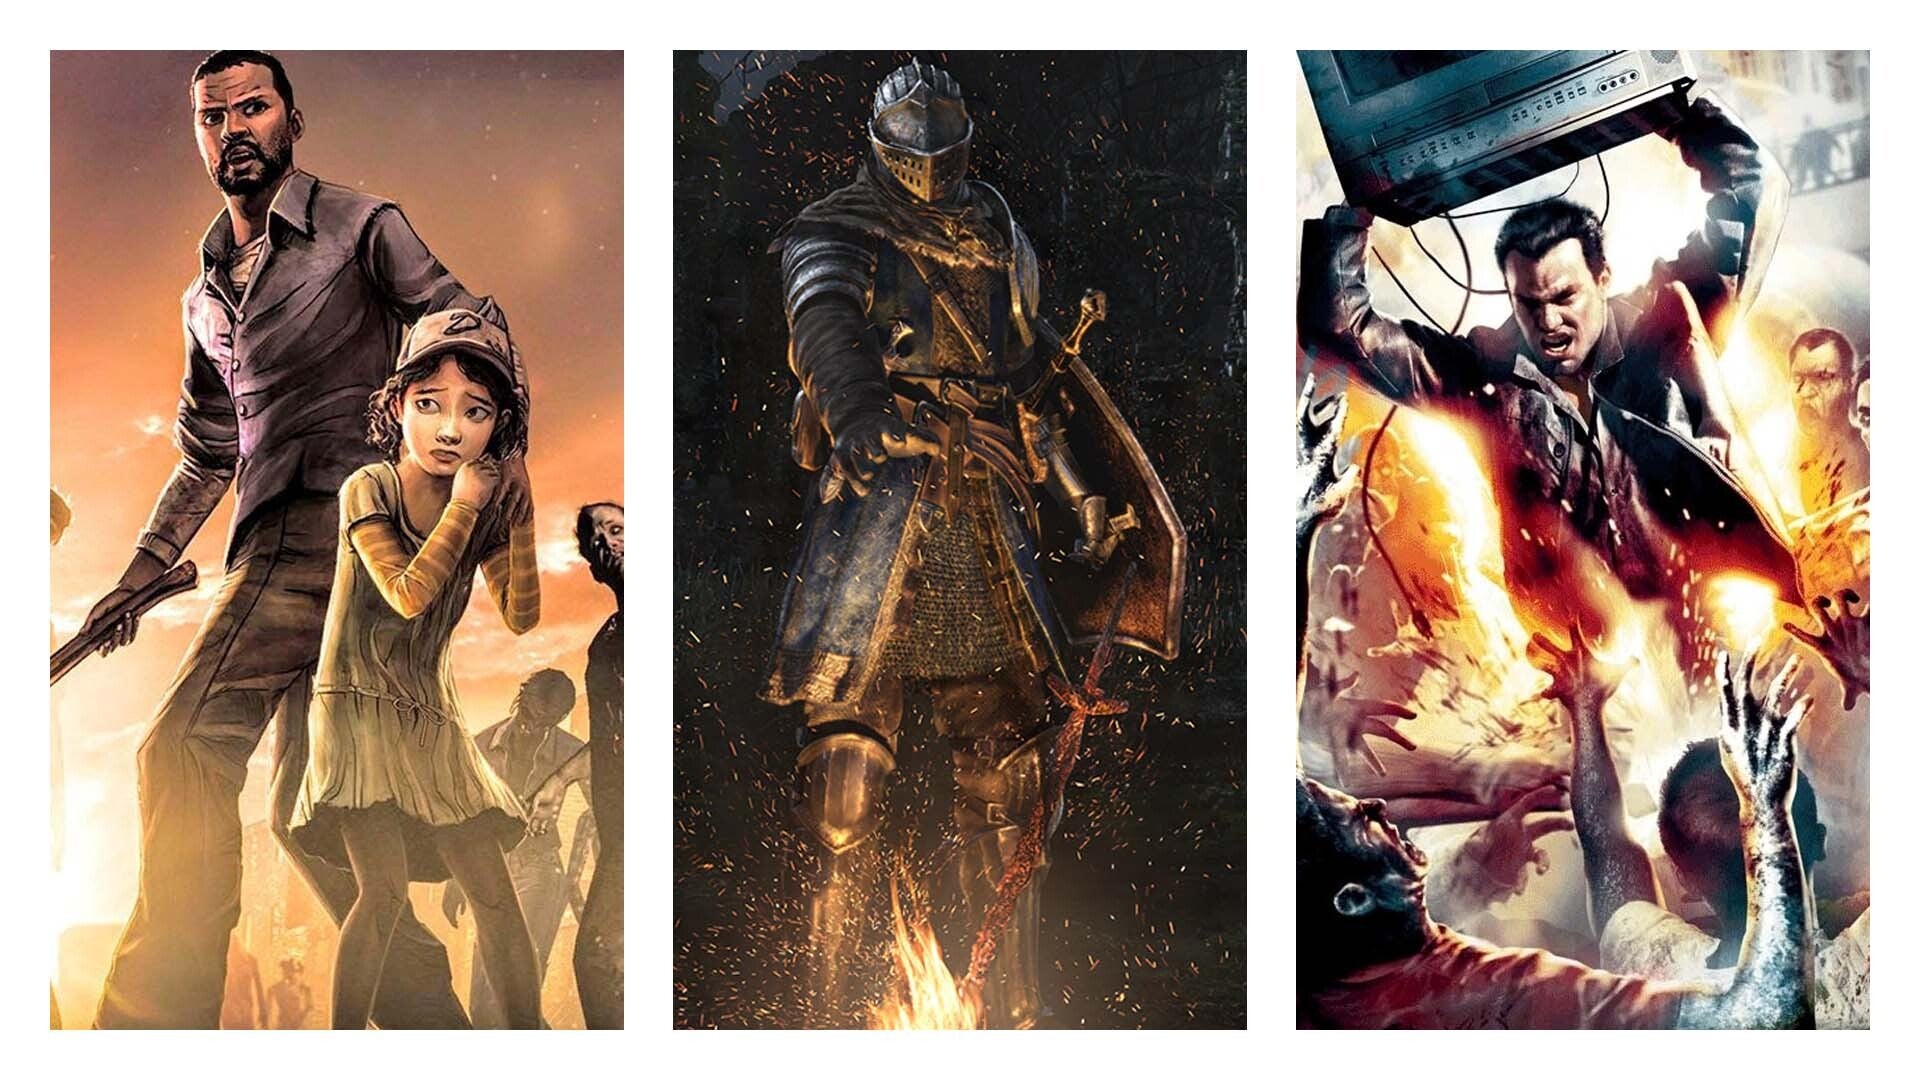 A composite image divided into thirds. From left to right: Lee and Clementine from The Walking Dead, a knight from Dark Souls, and Frank West from Dead Rising